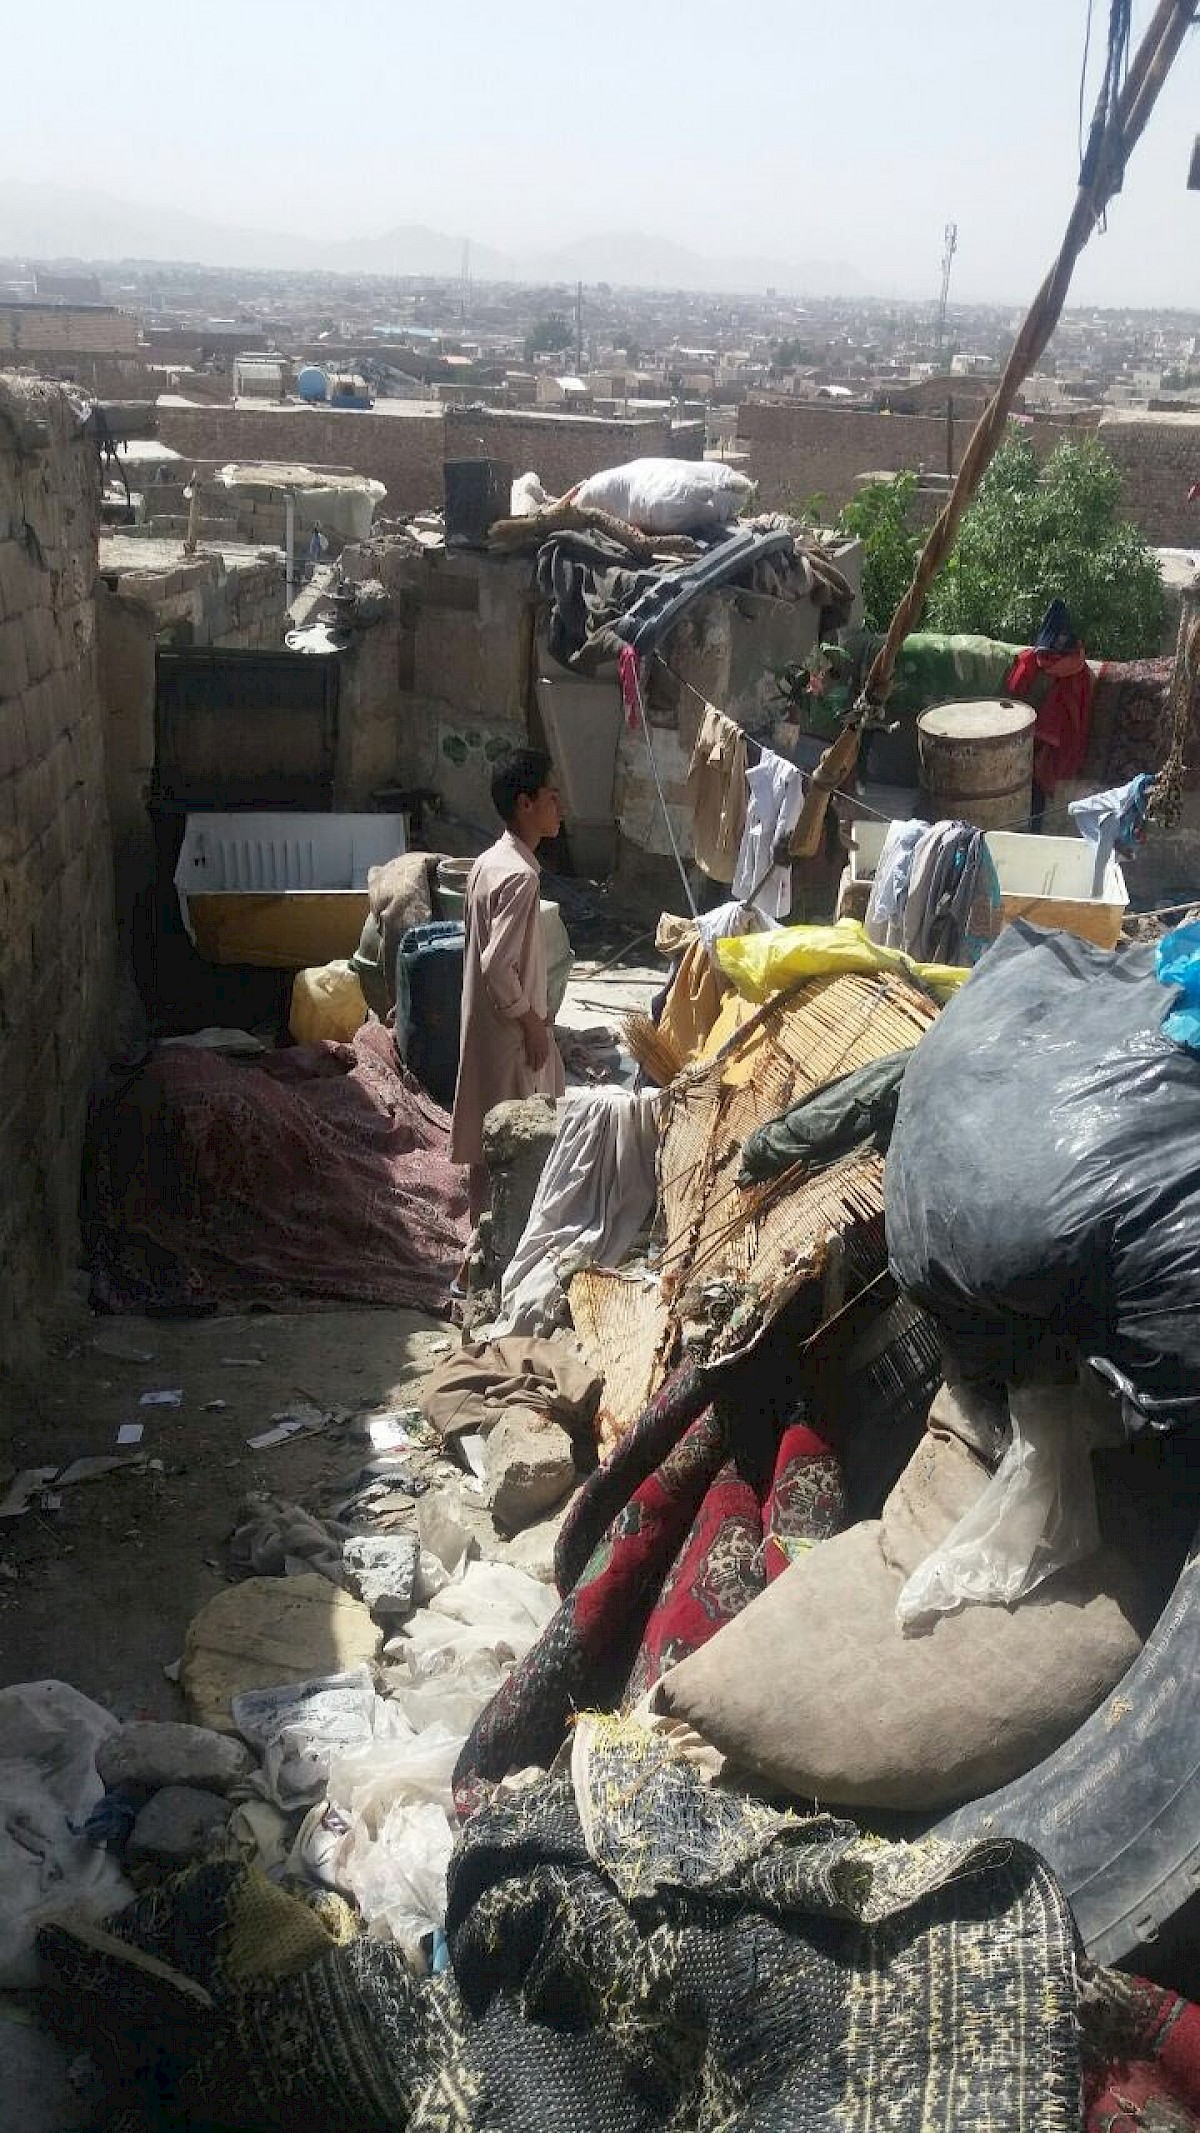 Rubbish and useless stuff collected and stored by a refugee family. Refugee inhabited area in poor living condition, Zahedan City, Iran. ©RI Team,2017